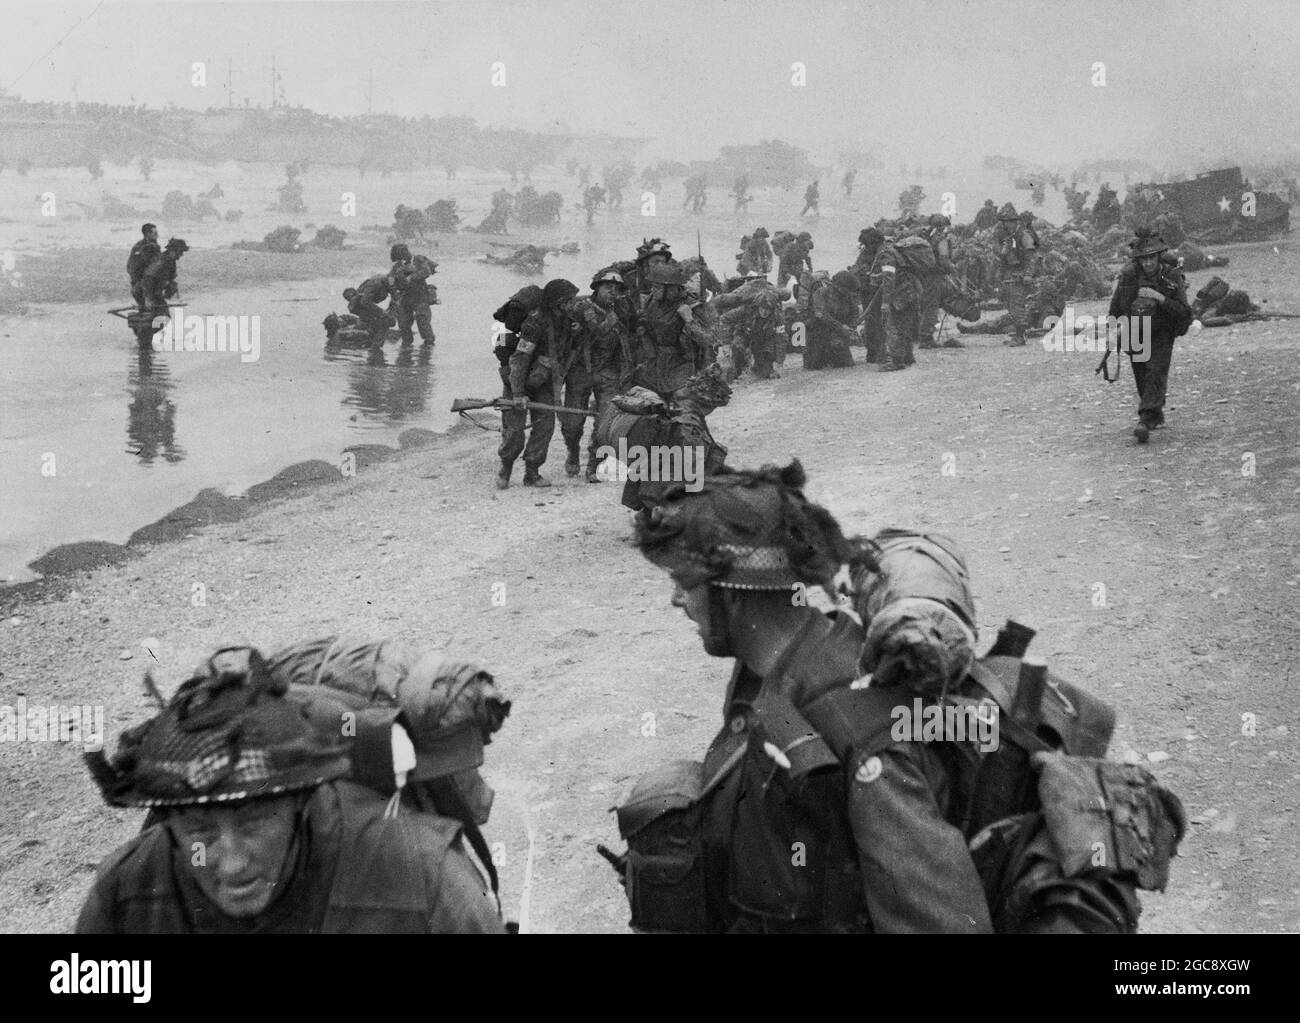 SWORD BEACH, NORMANDY, FRANCE - 06 June 1944 - British troops on Queen Beach, Sword Area at approx. 8:30am 6th June 1944. Soldiers of No.1 Platoon, 84 Stock Photo